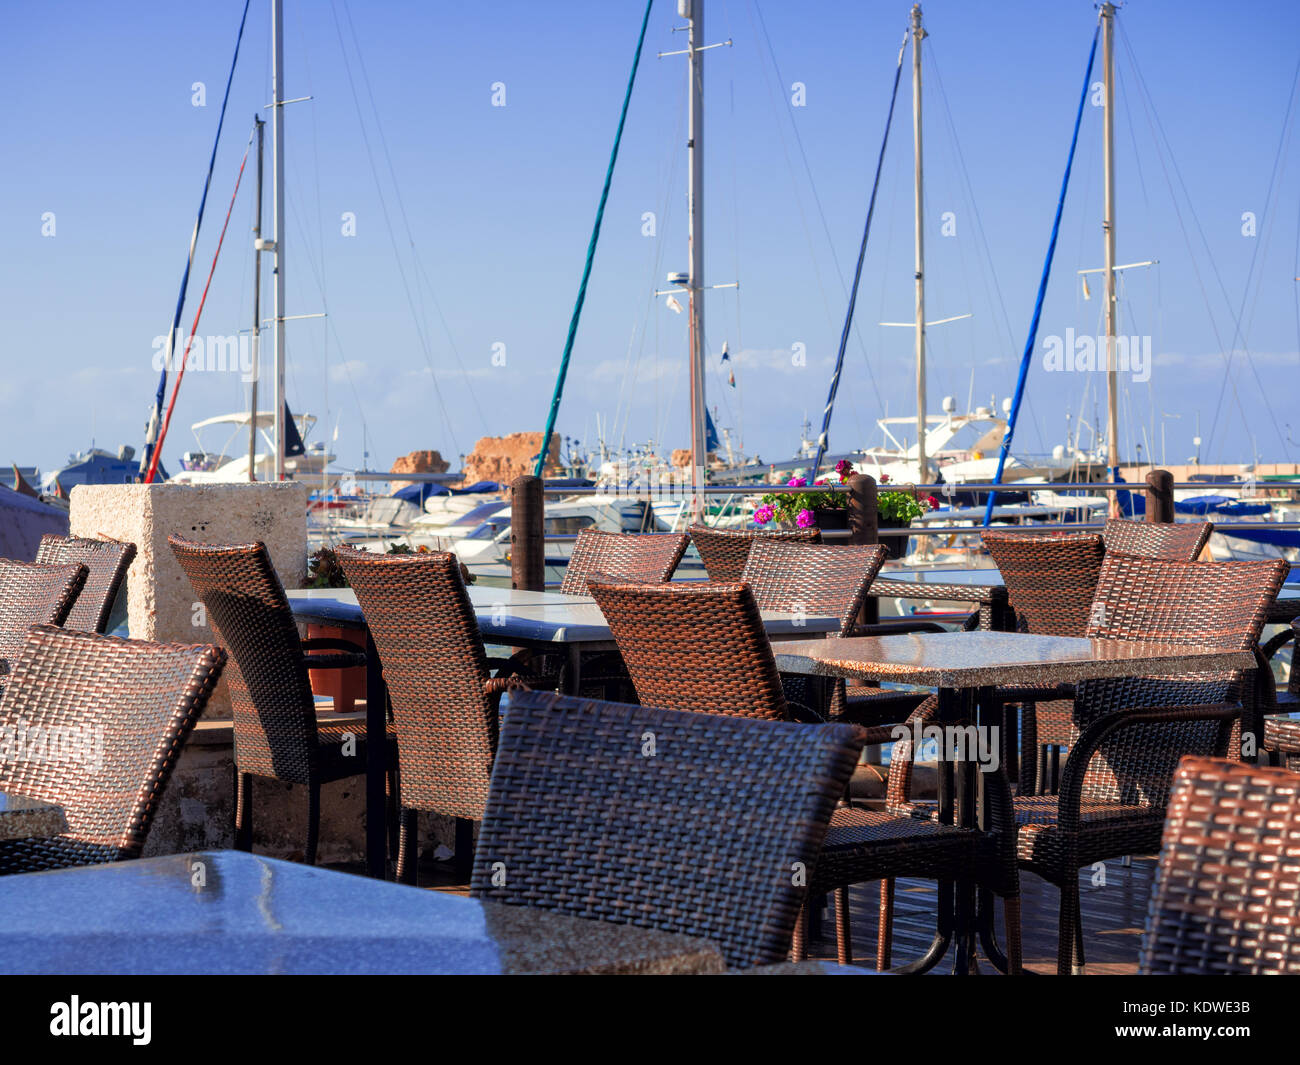 Empty Harbour Cafe Restaurant In Kato Paphos, Cyprus. July, 2016. Shallow depth of field. Stock Photo